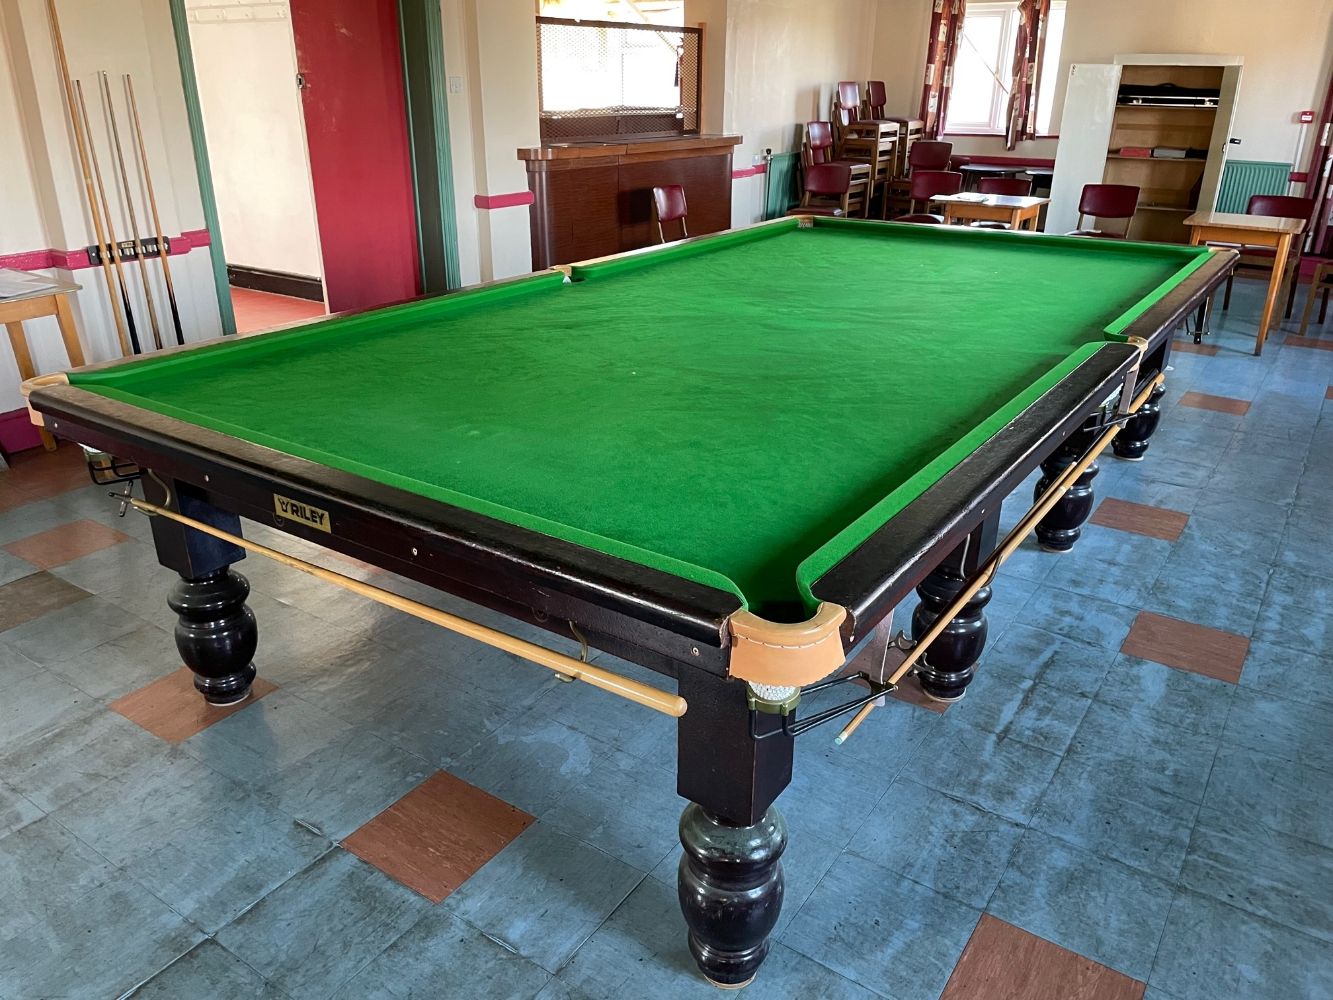 Riley full size snooker table and Fitzpatrick & Longley three-quarter snooker table